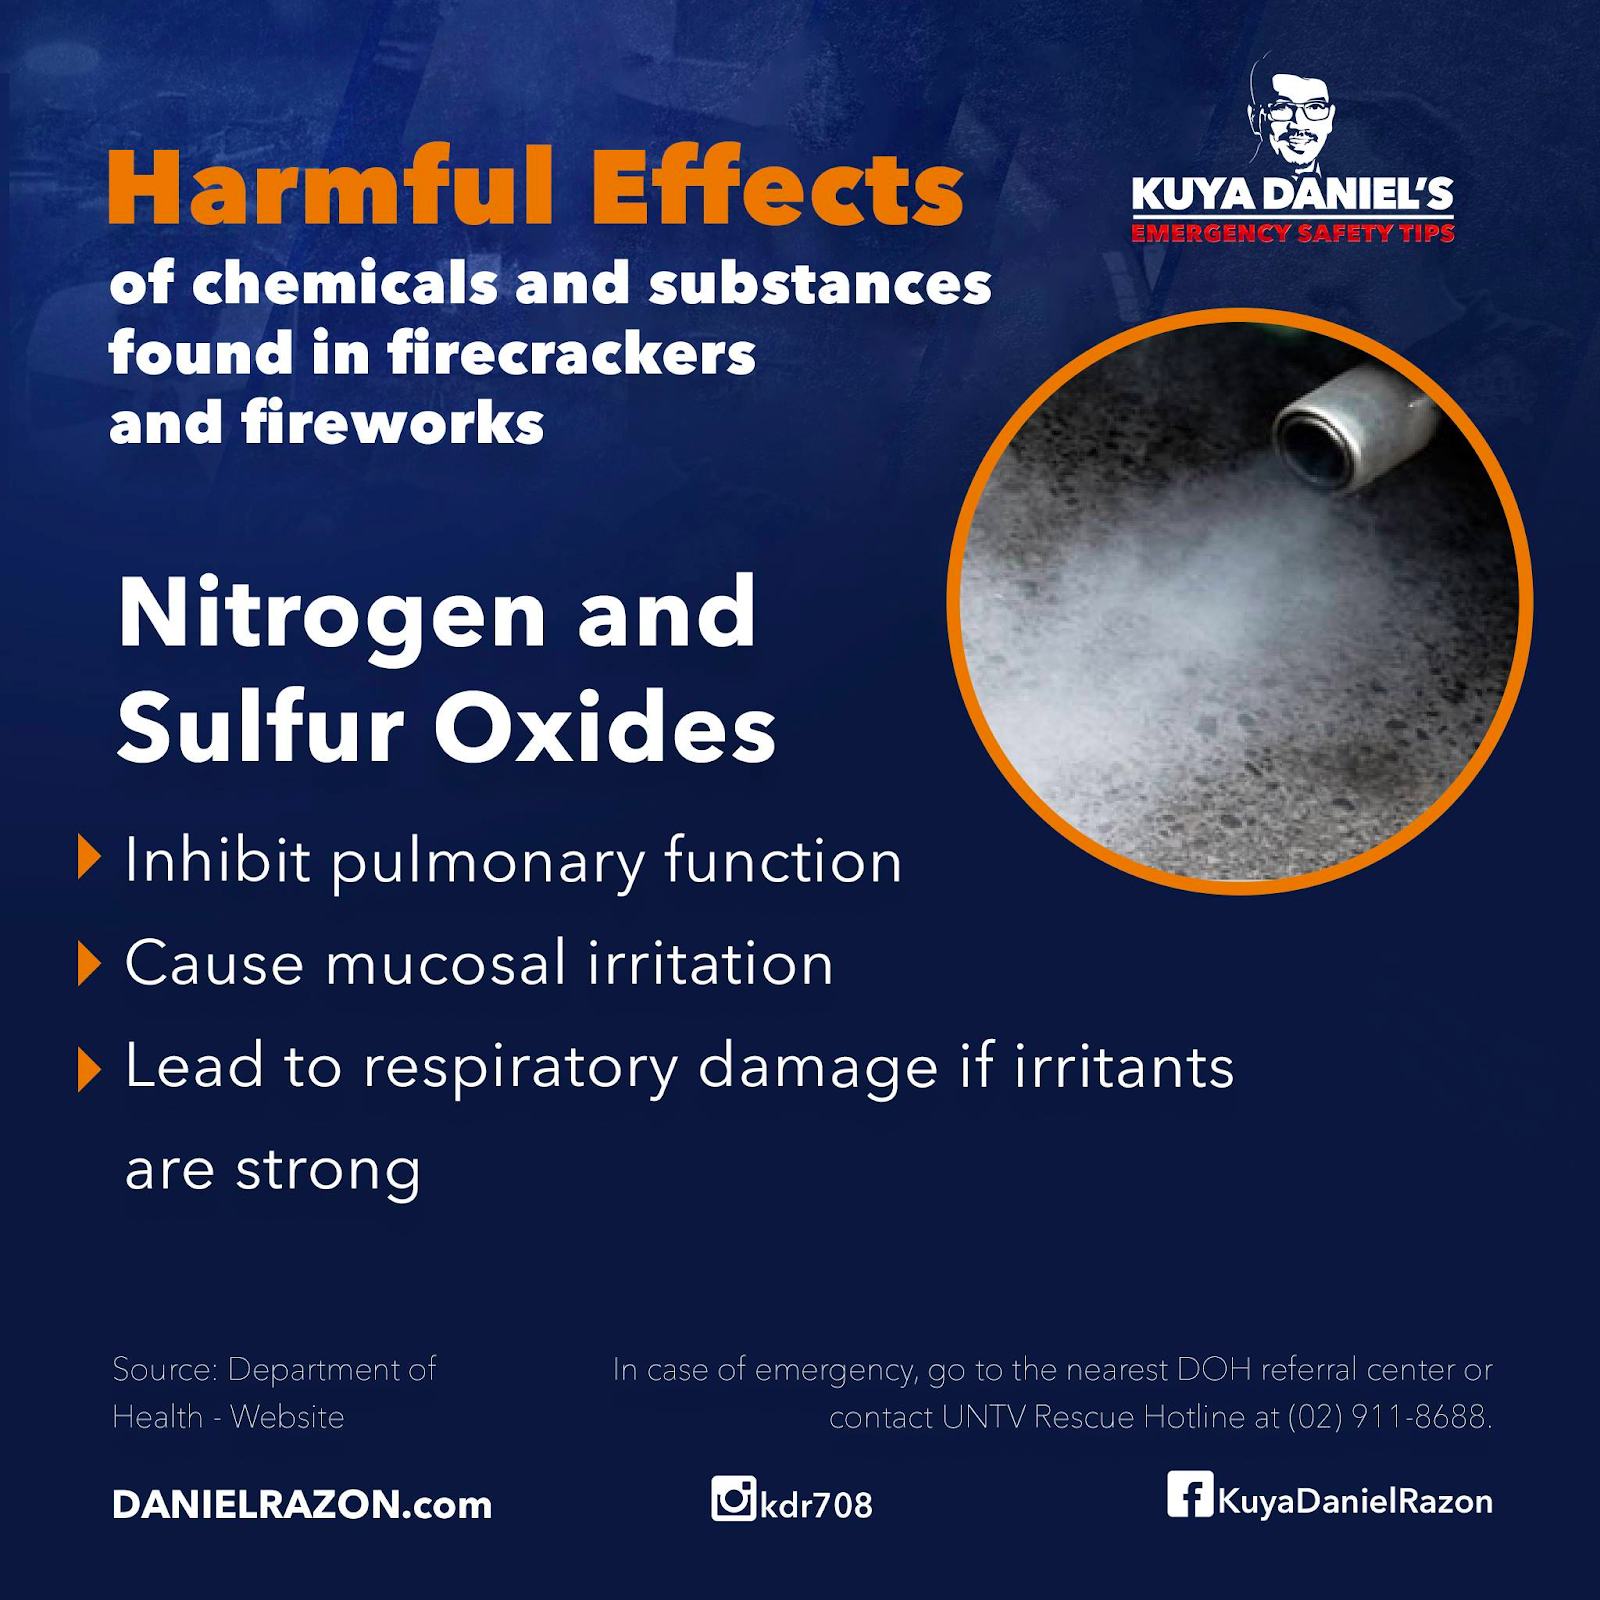 nitrogen and sulfur oxides in the body